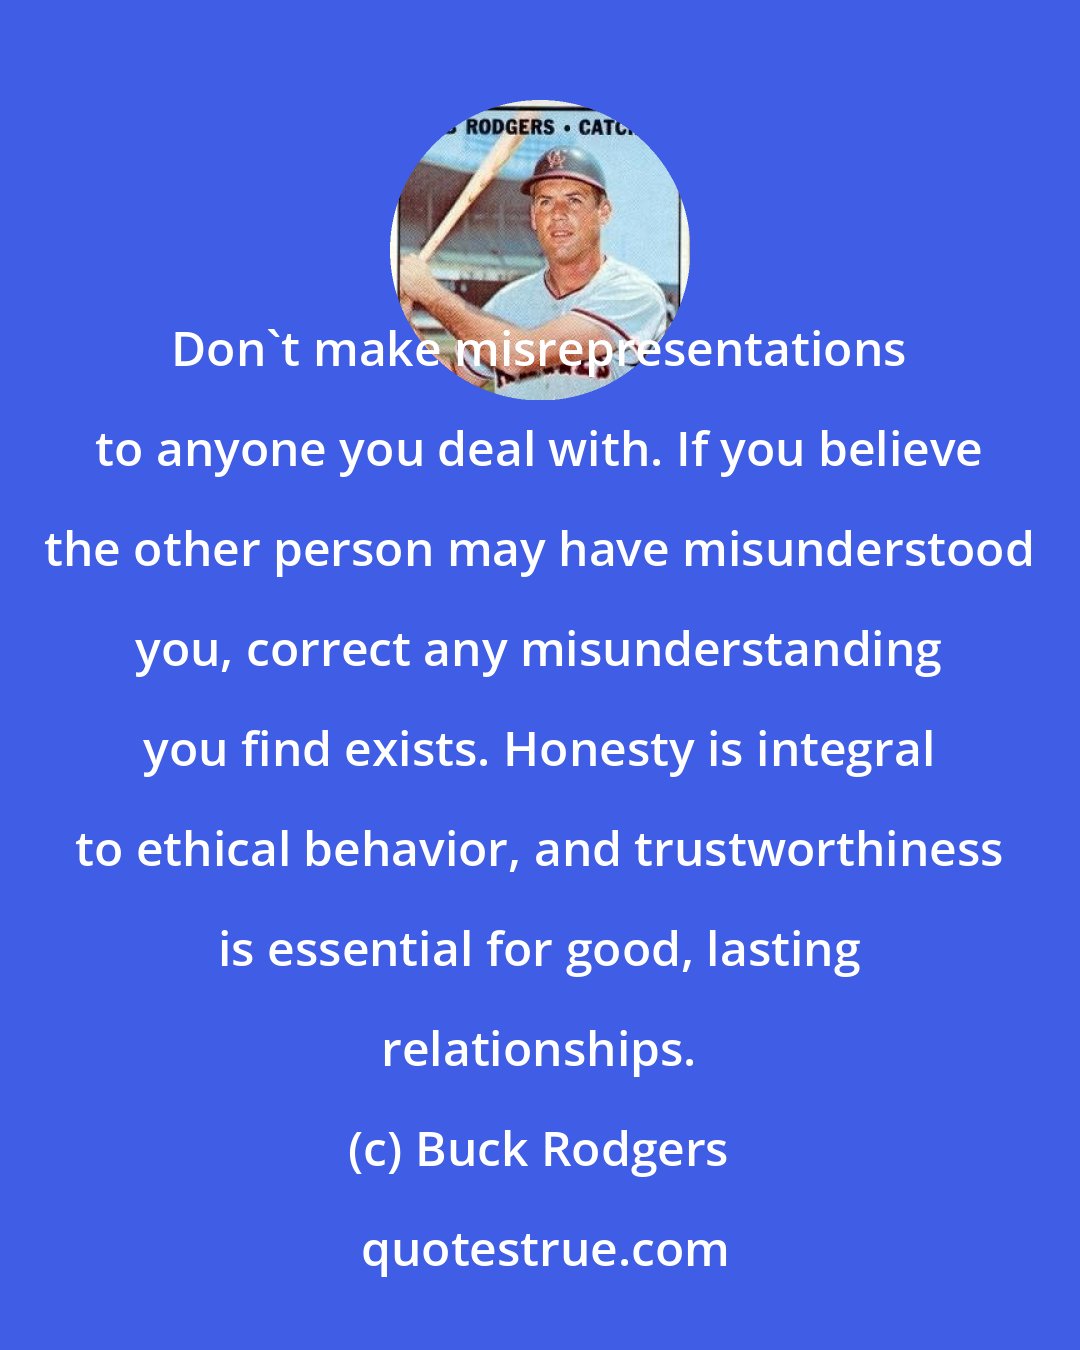 Buck Rodgers: Don't make misrepresentations to anyone you deal with. If you believe the other person may have misunderstood you, correct any misunderstanding you find exists. Honesty is integral to ethical behavior, and trustworthiness is essential for good, lasting relationships.